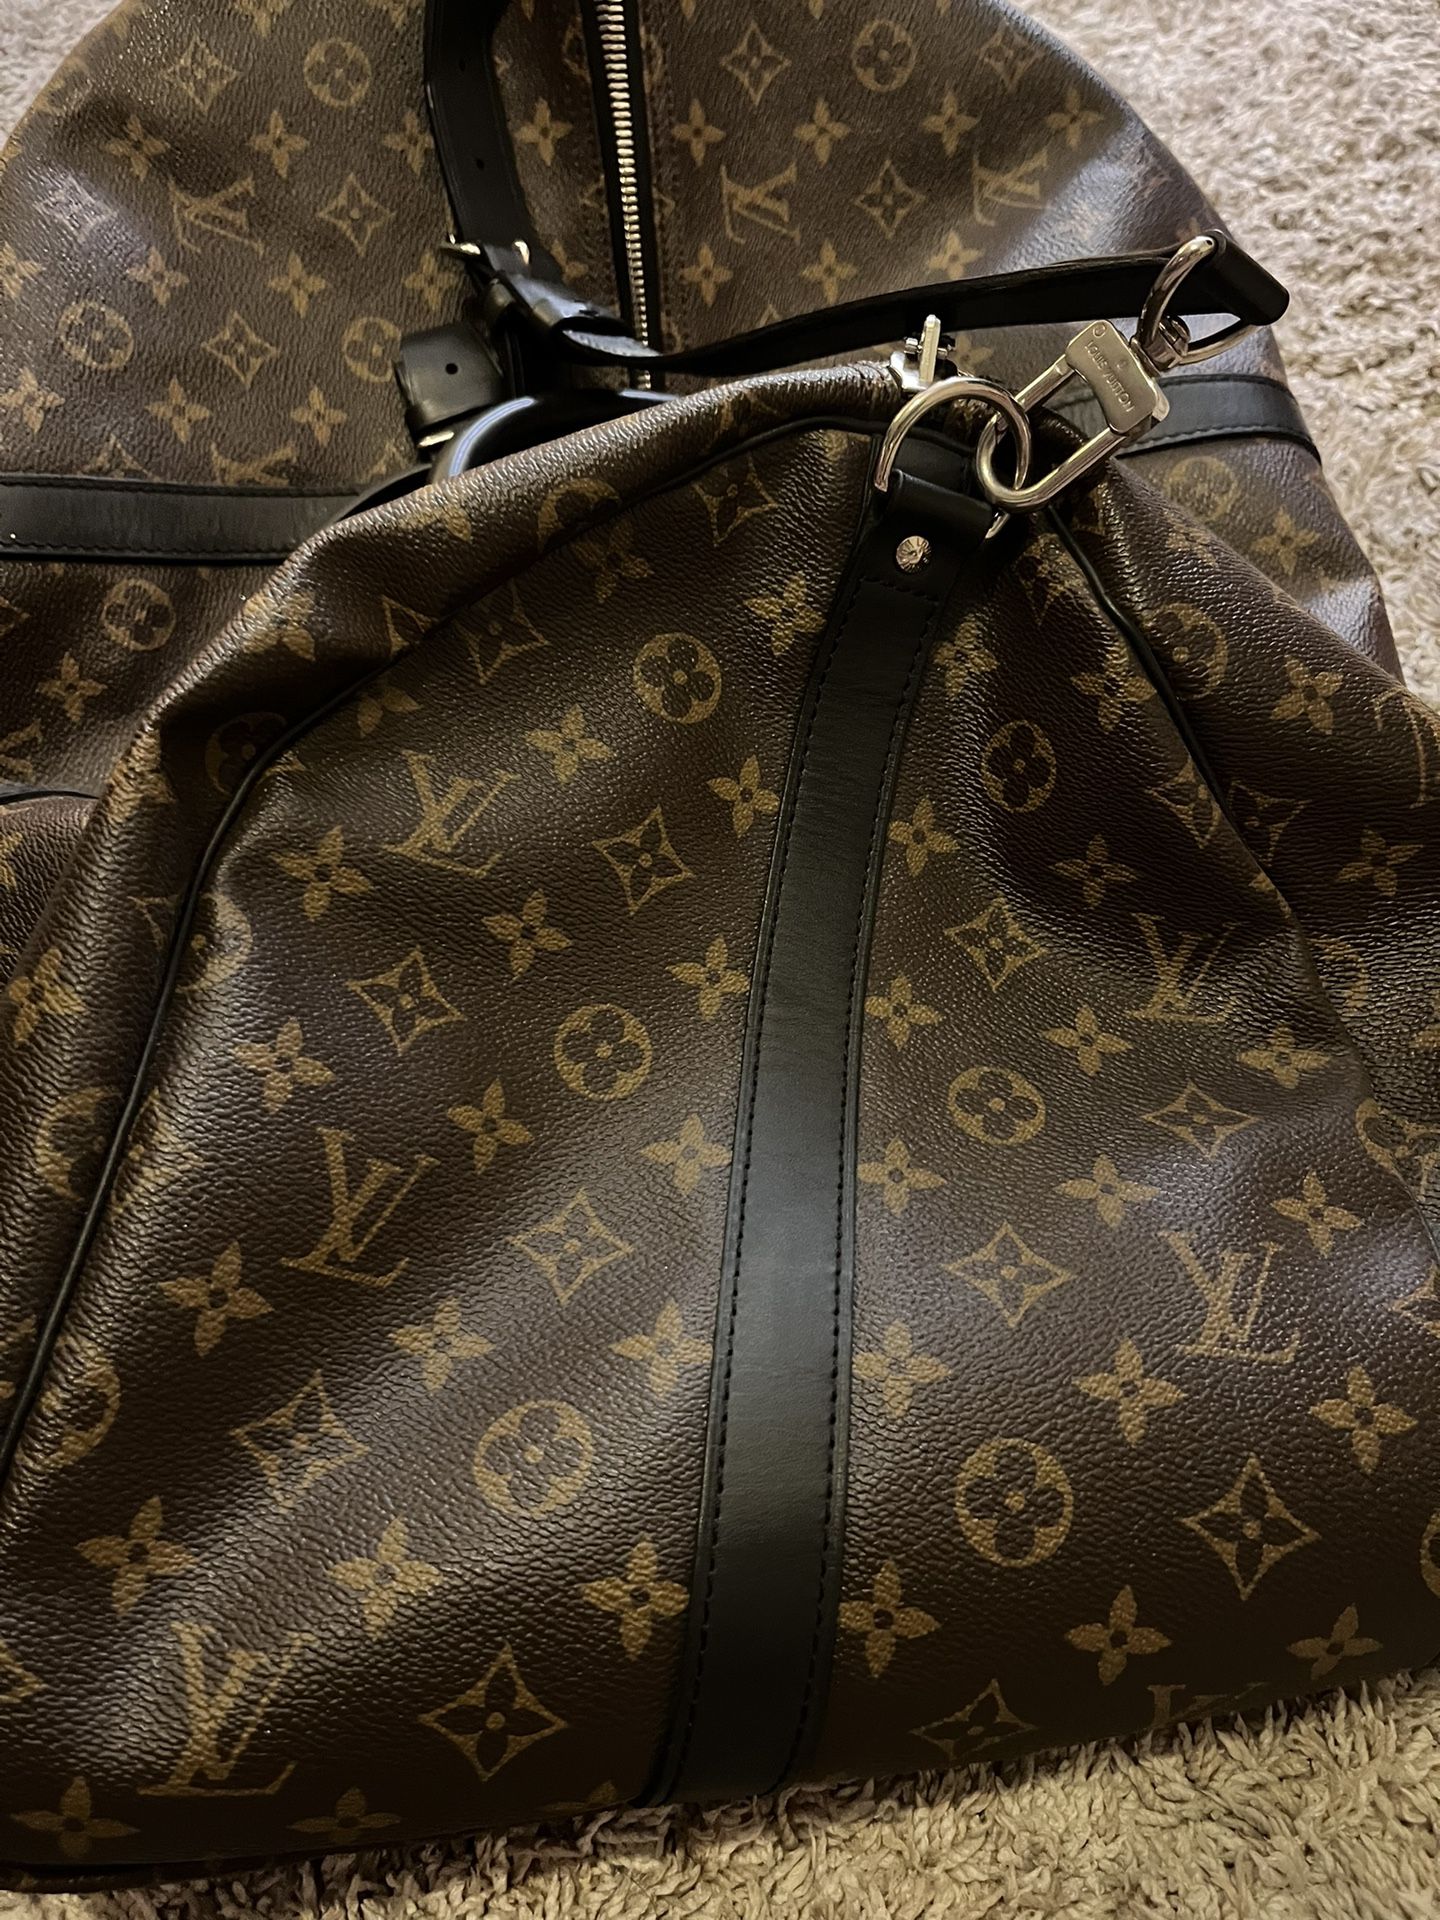 Louis Vuitton keepall 55 100% Authentic for Sale in Santee, CA - OfferUp